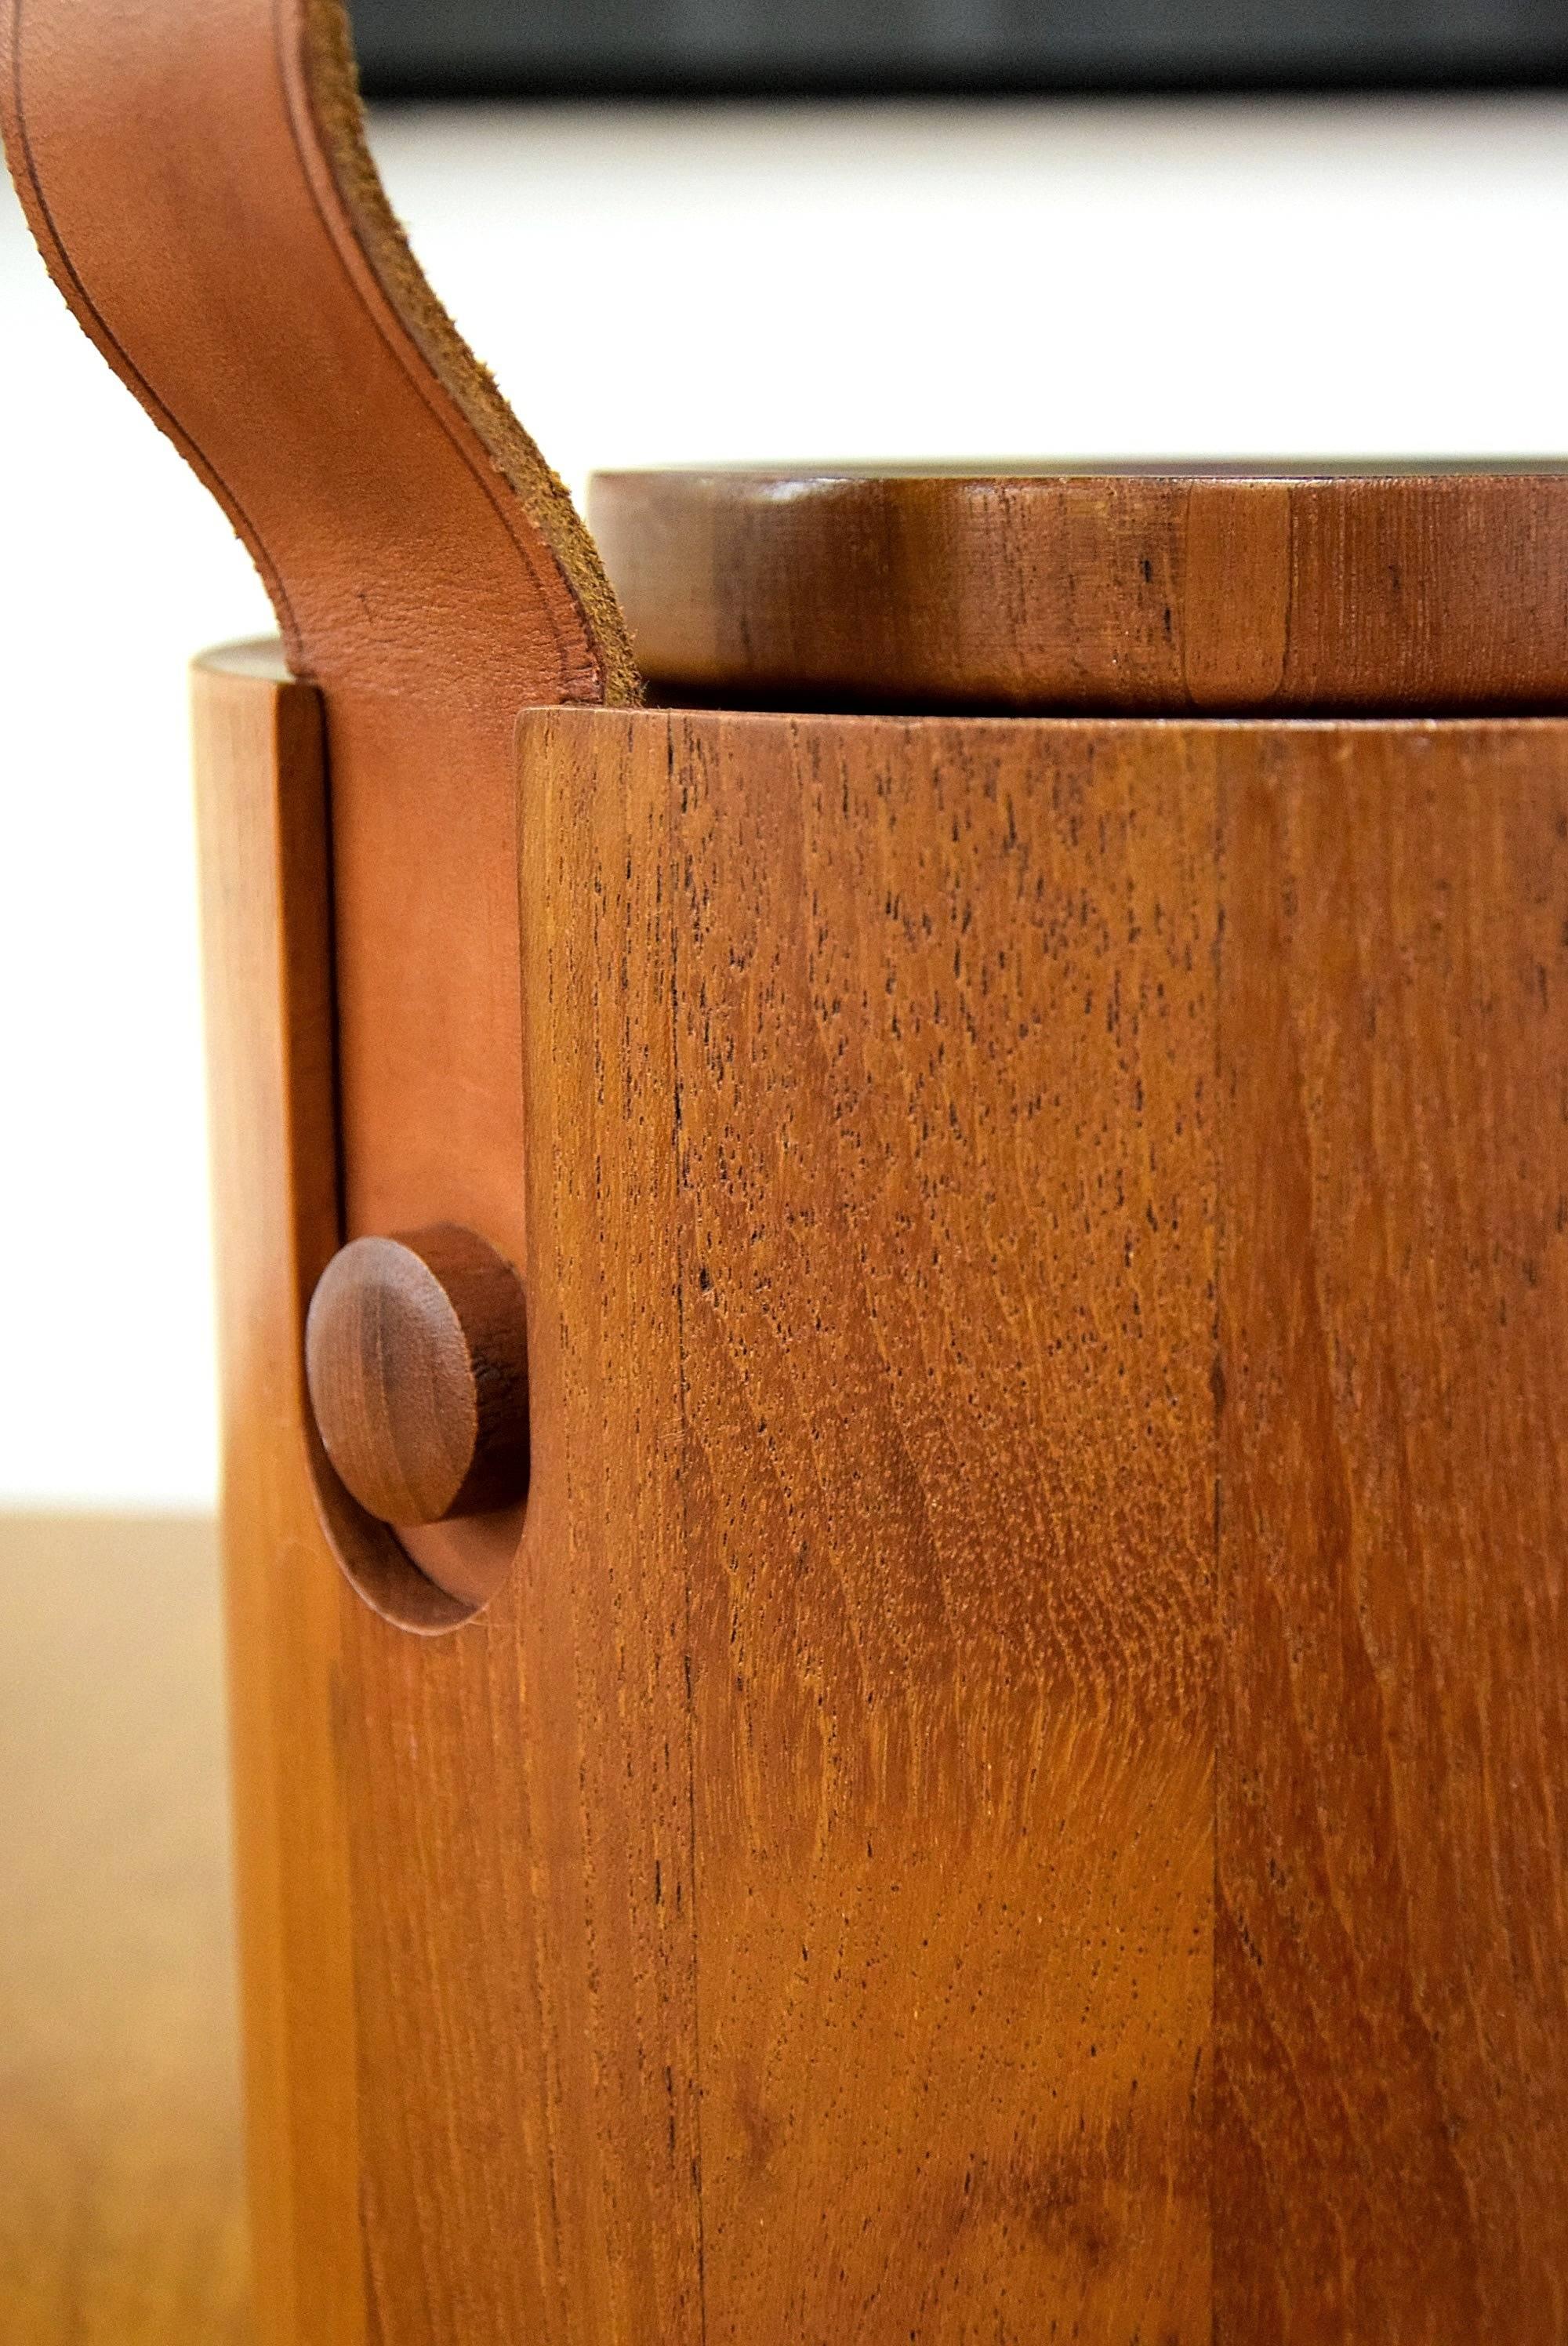 Big teak ice bucket designed by Jens H. Quistgaard in the 1960s for Nissen, Denmark.

Ice bucket has an orange plastic ice holder and is stamped on the bottom with Nissen Denmark.

Measurements: H 24 x W 22 cm.